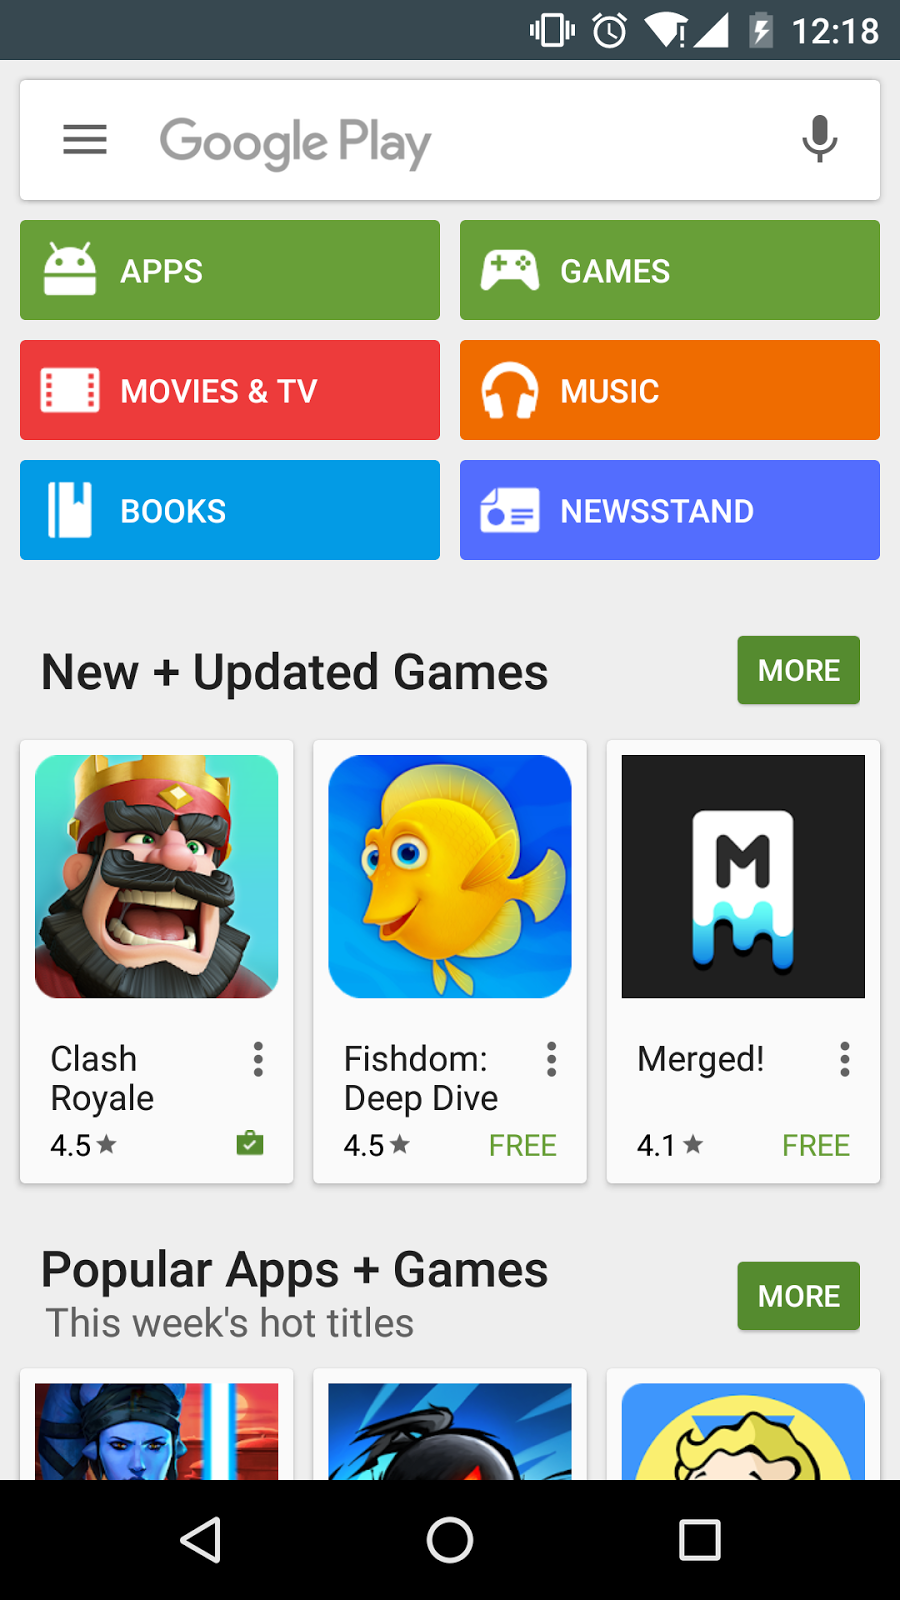 Google play store apk download for android 4.4 2 - machinegase